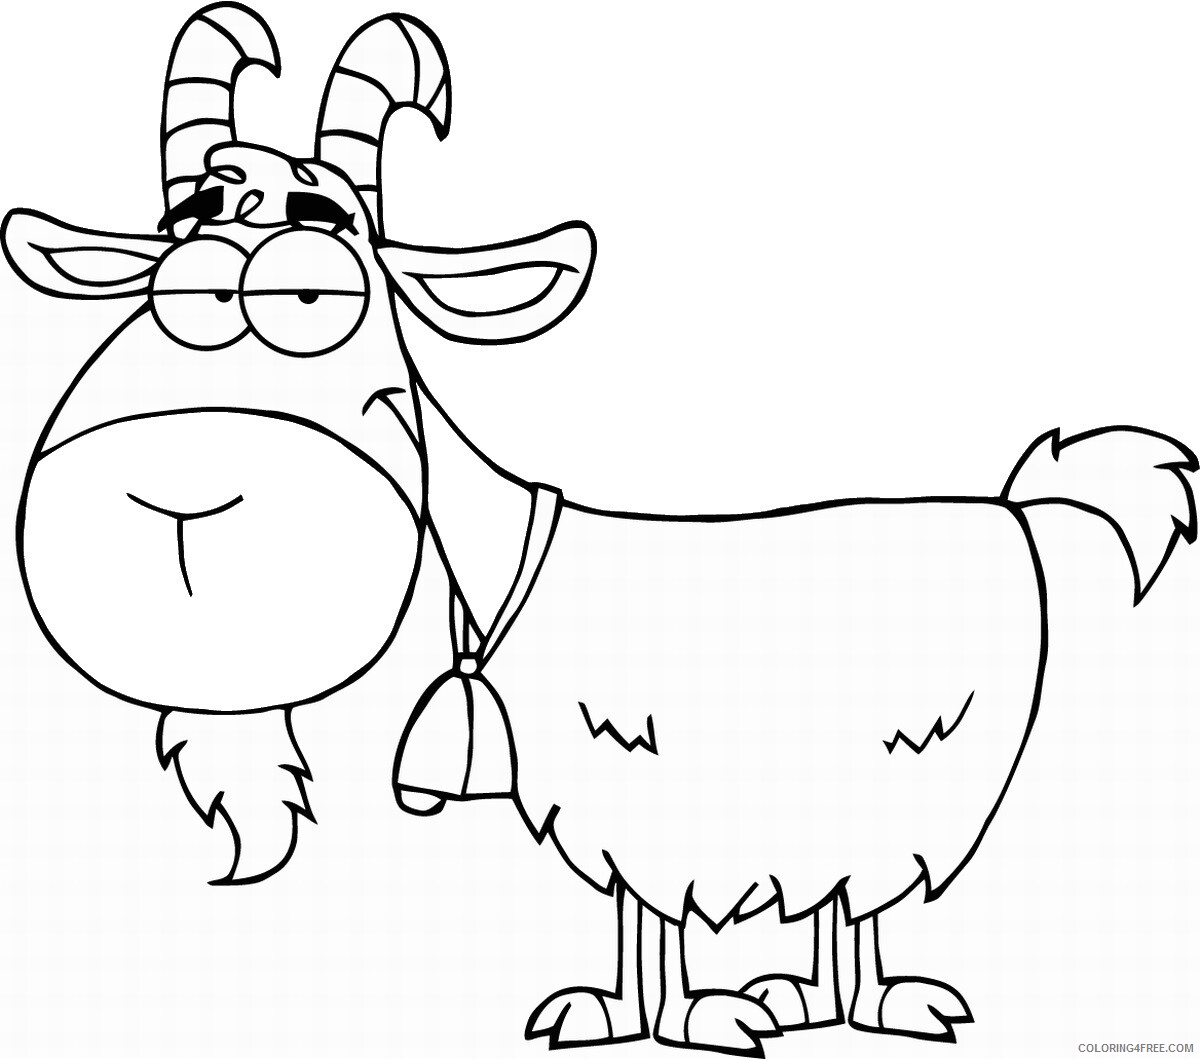 Goat Coloring Pages Animal Printable Sheets goat_cl_16 2021 2453 Coloring4free